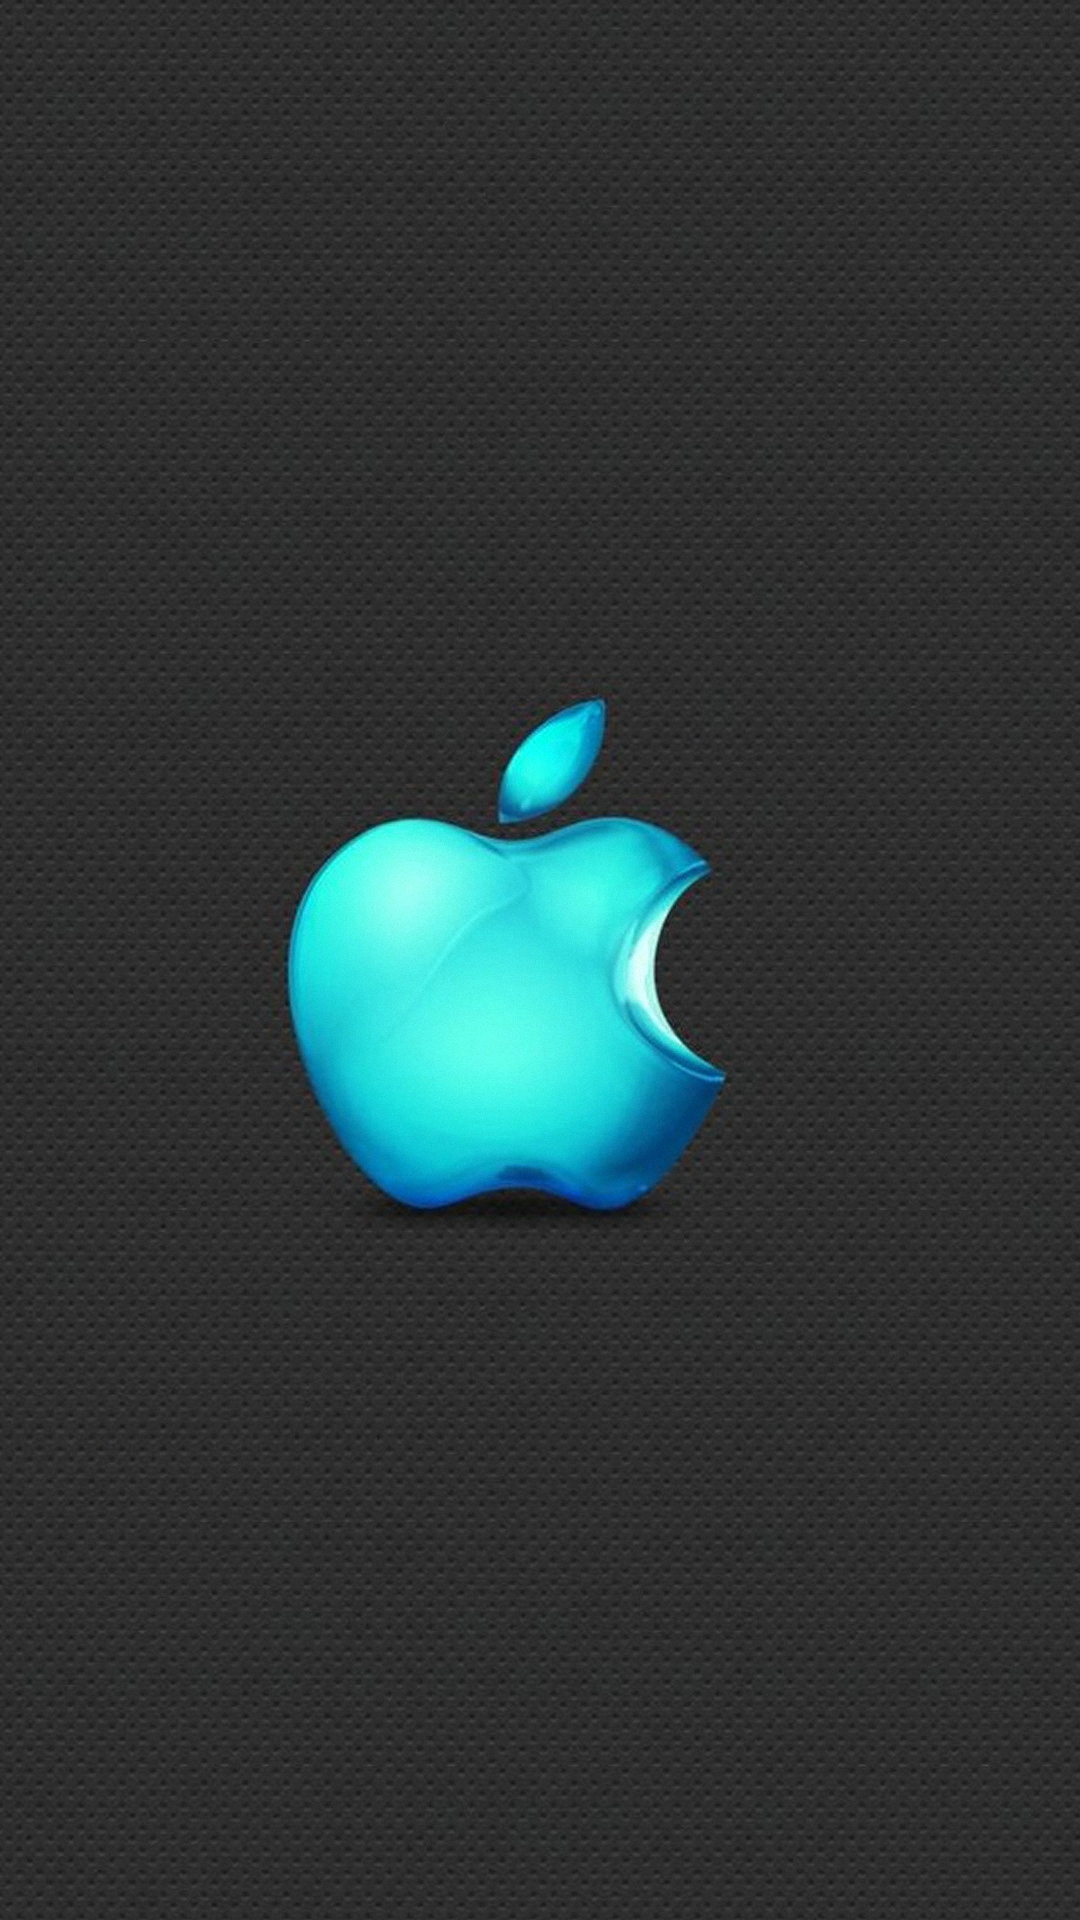 High Resolution Iphone High Resolution Apple Logo Wallpaper These hd